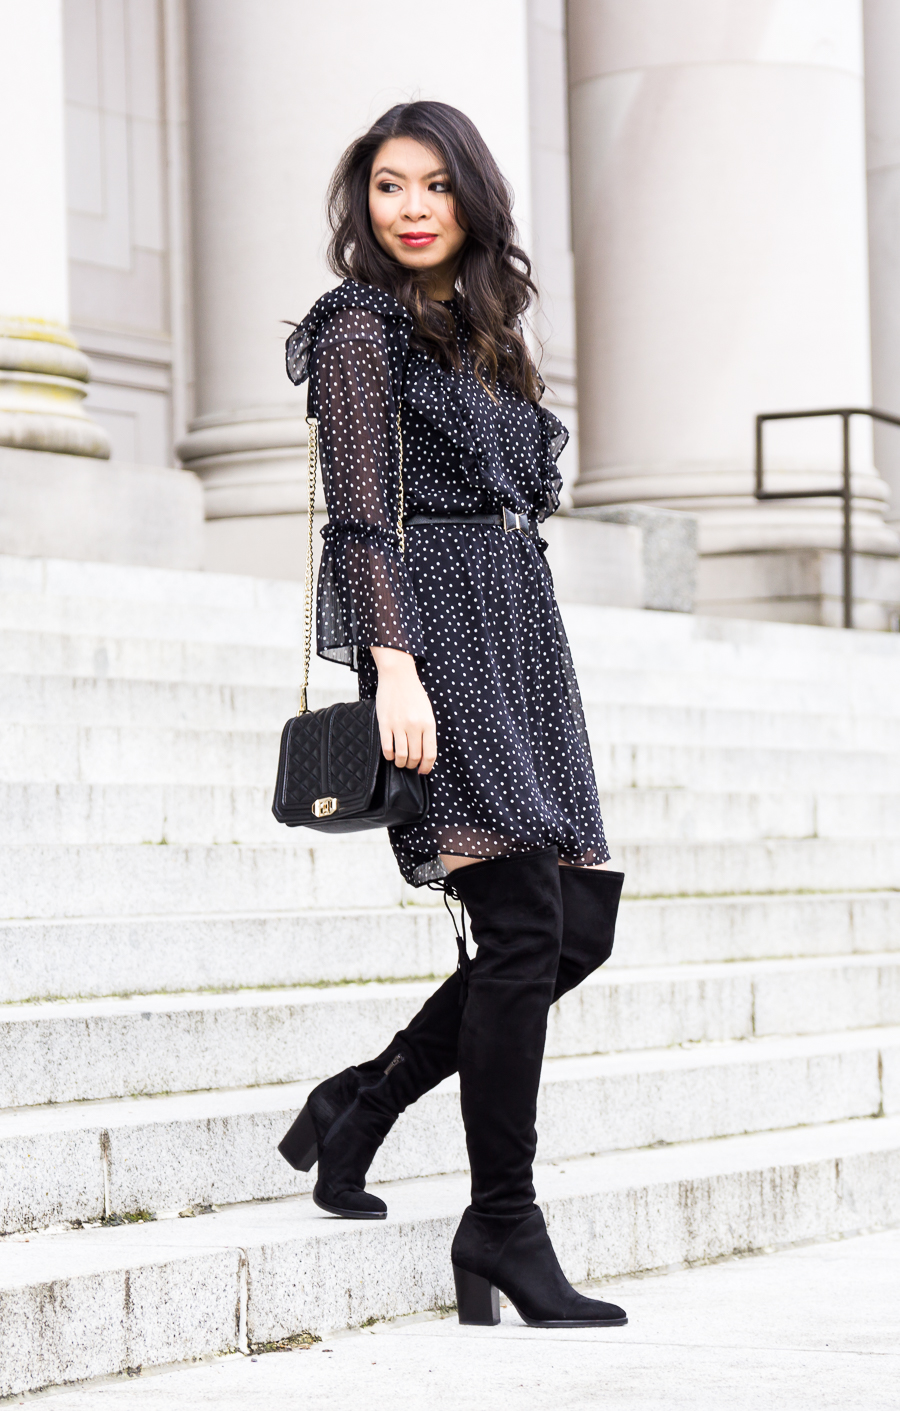 Topshop ruffle polka dot dress, Marc Fisher Alinda over the knee boots, cute chic outfit, petite fashion blog